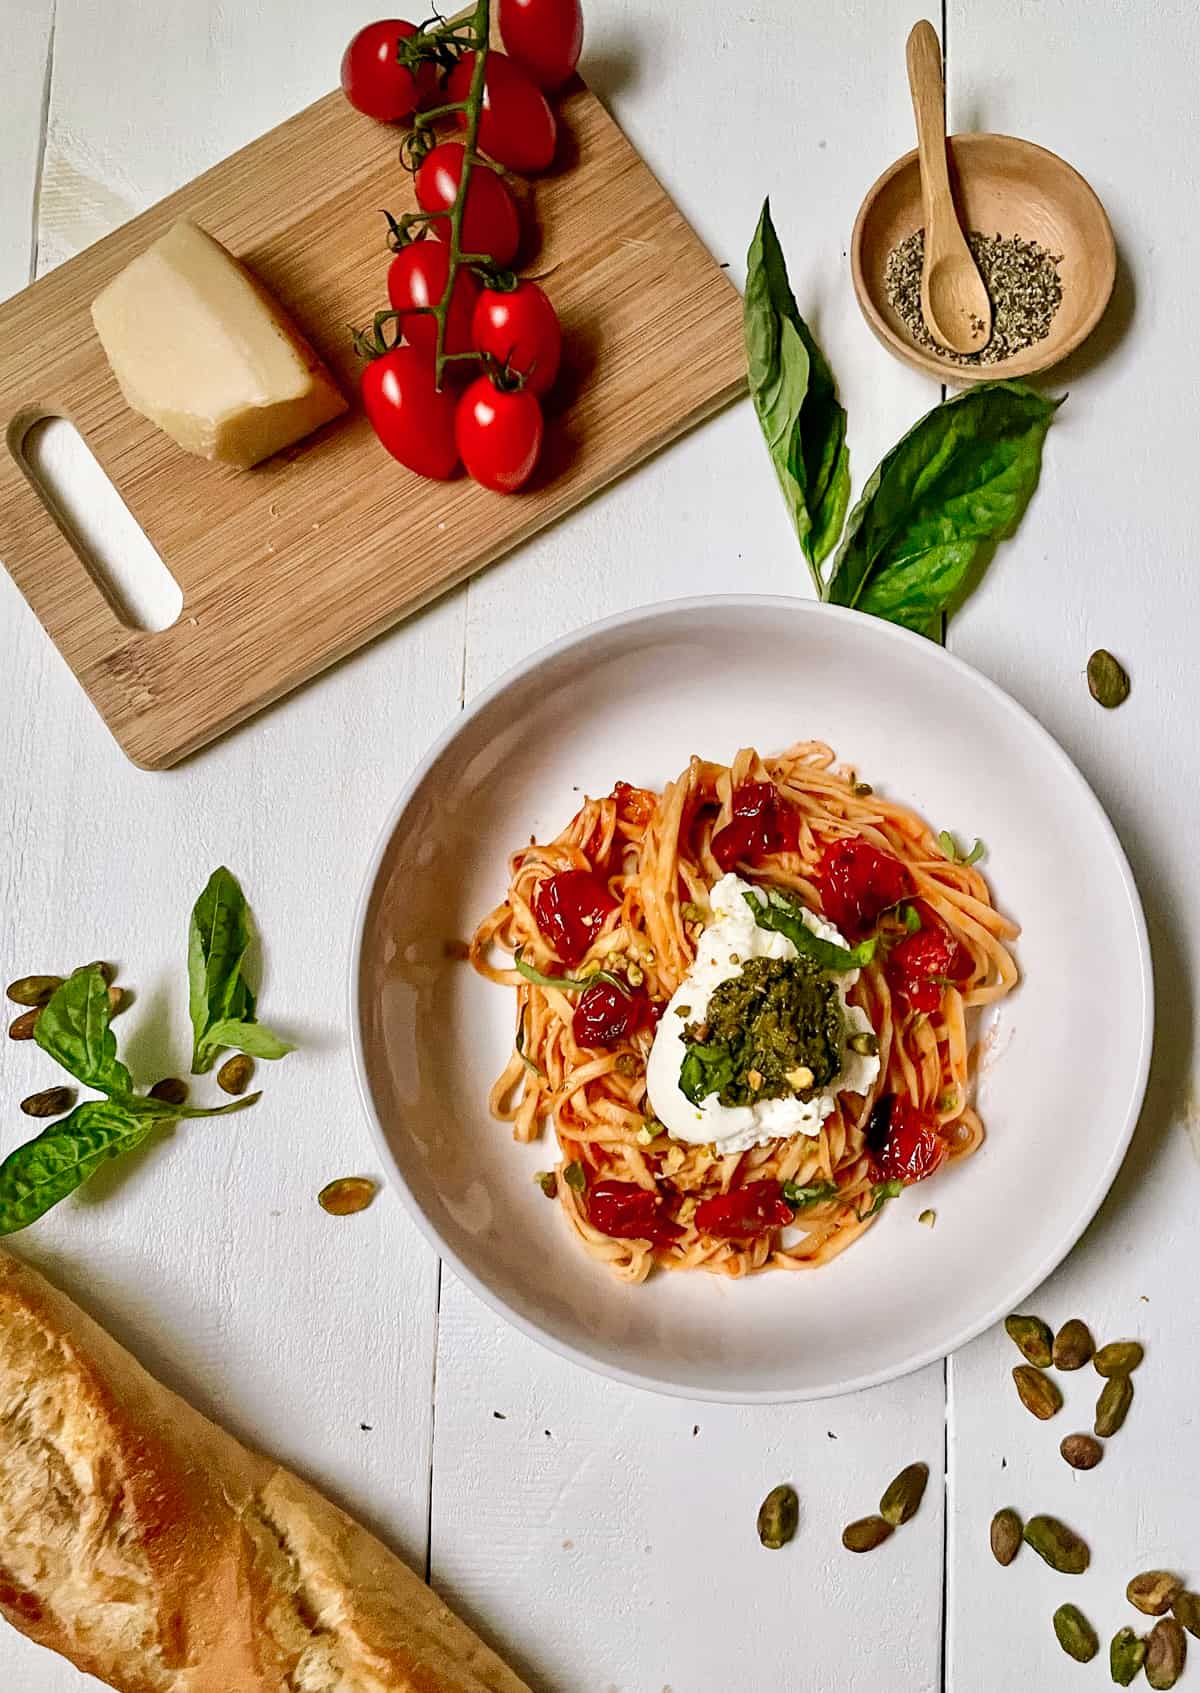 Pasta with tomatoes, ricotta, and pesto.